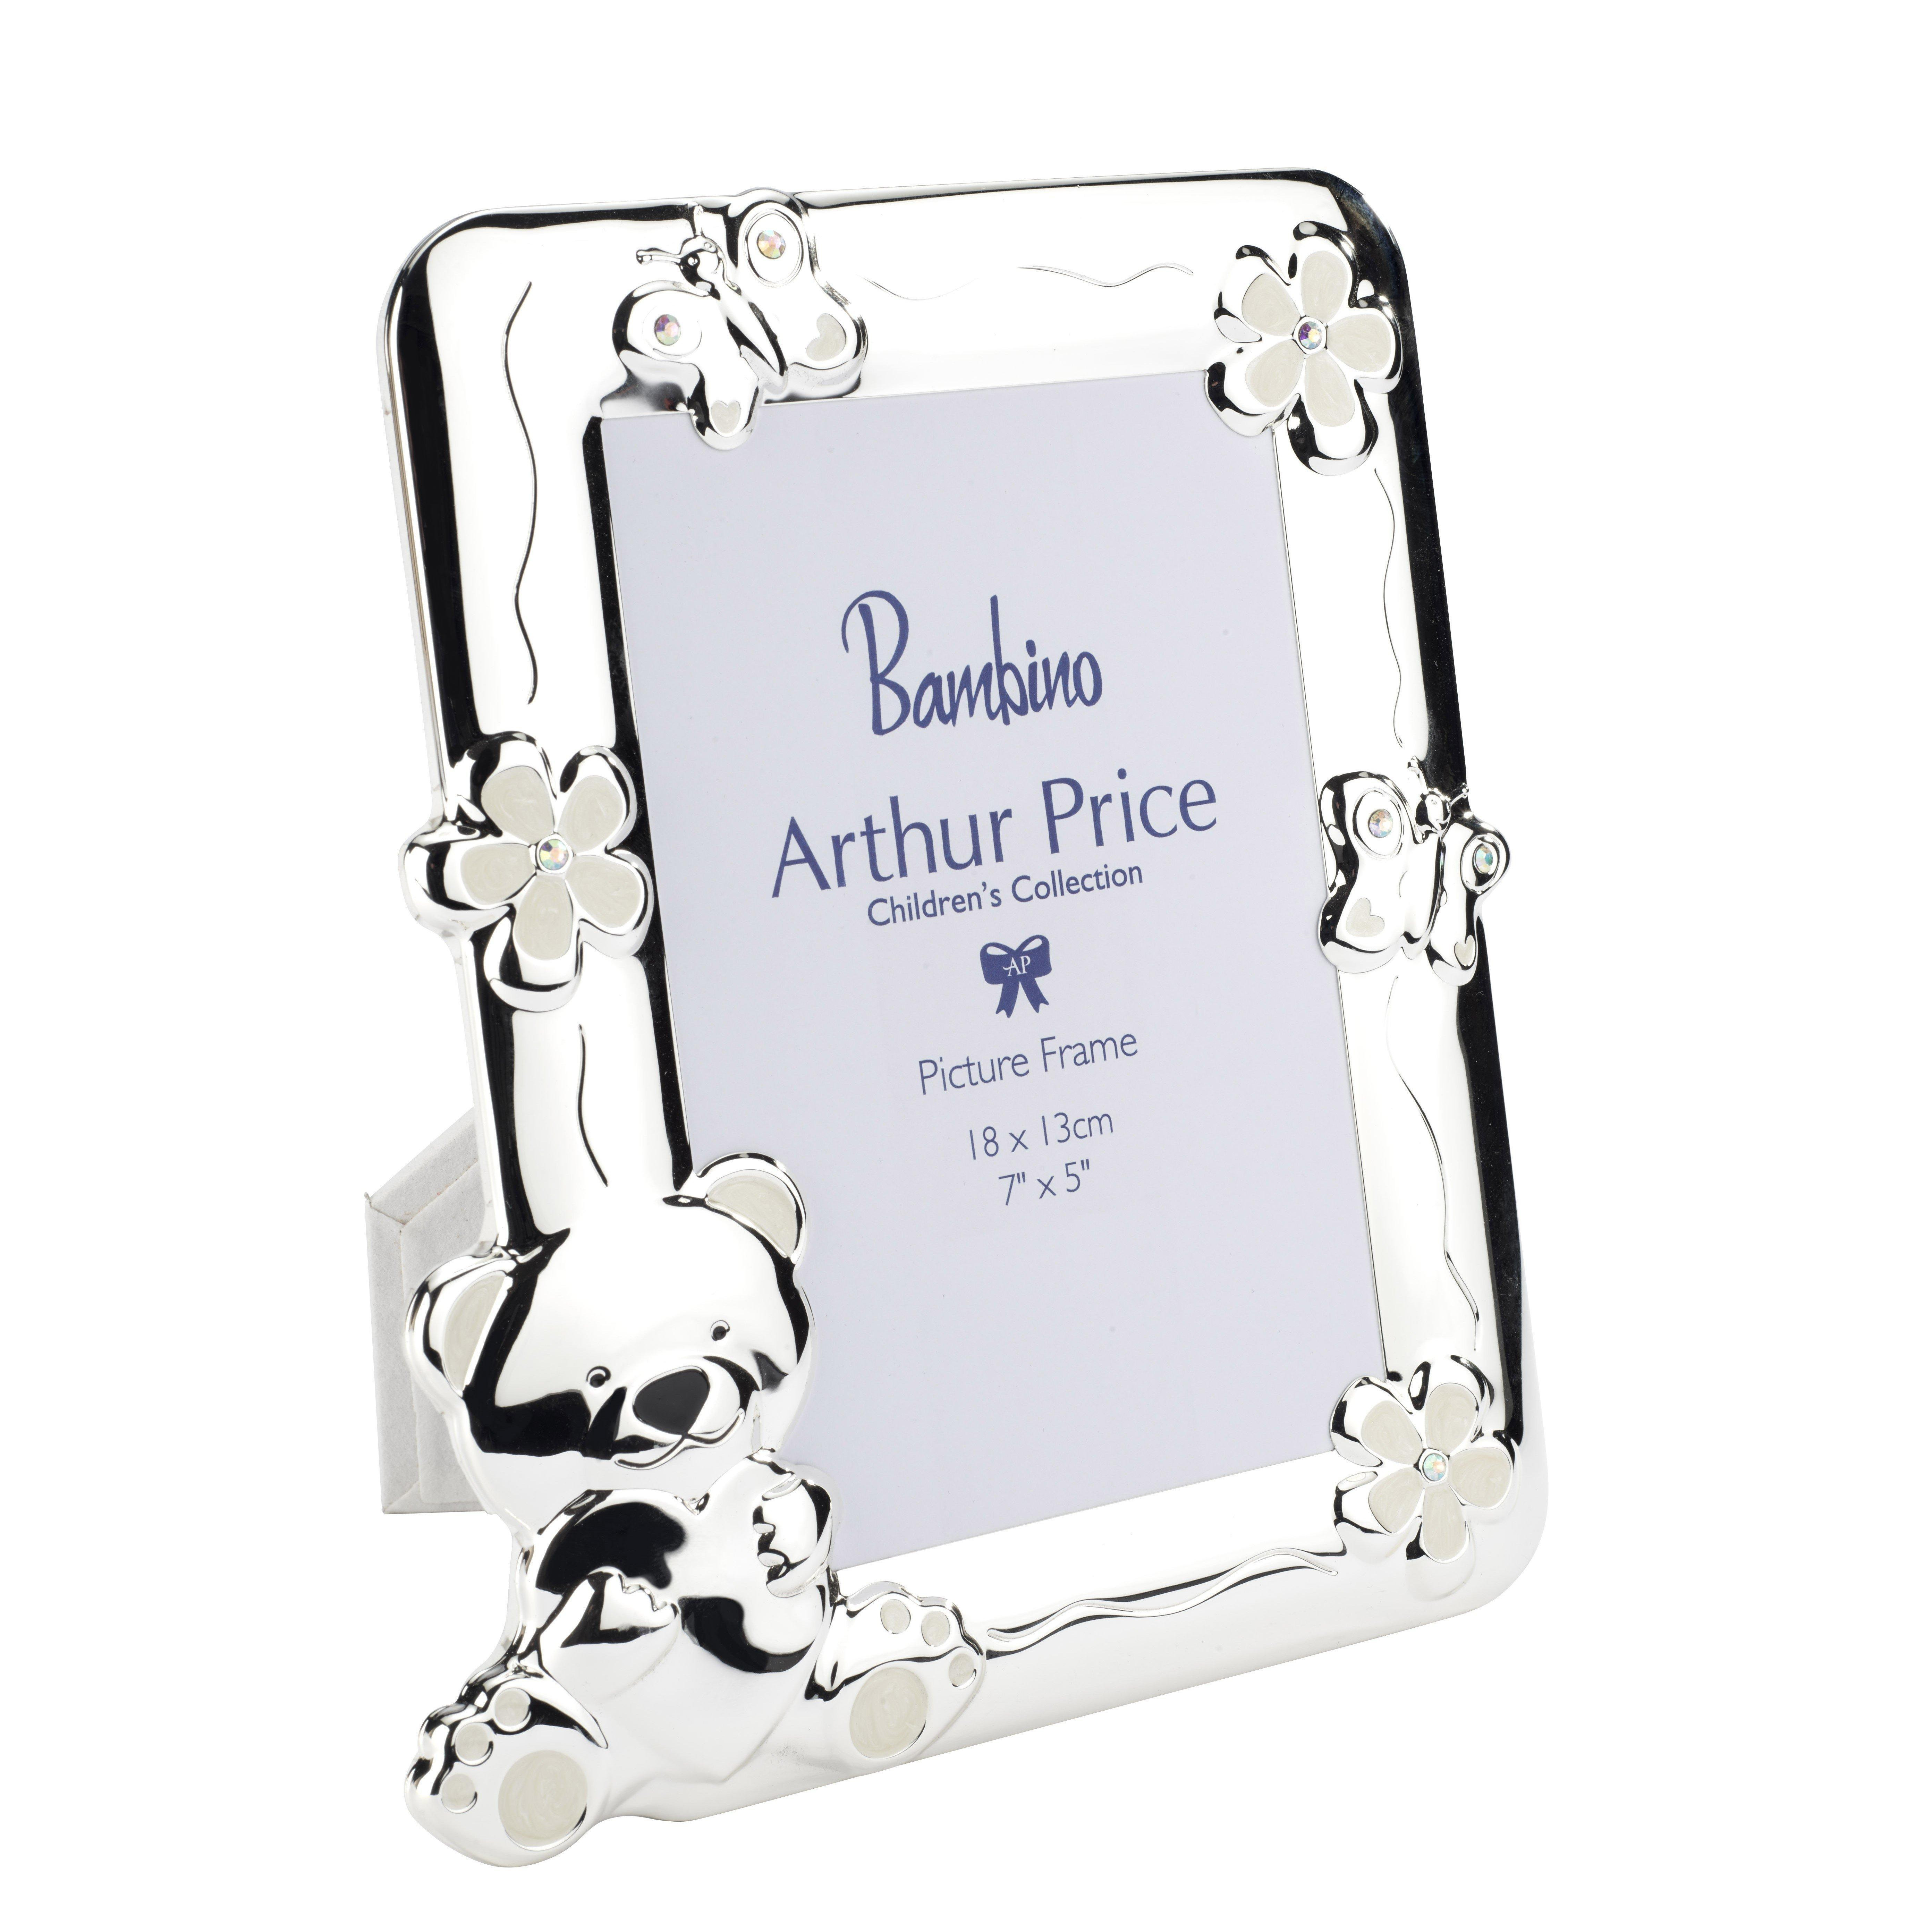 Bambino 'Teddy Bear' Silver Plated Photo Frame Holds 7 x 5 Inch Photo Luxury Children's Gift - image 1